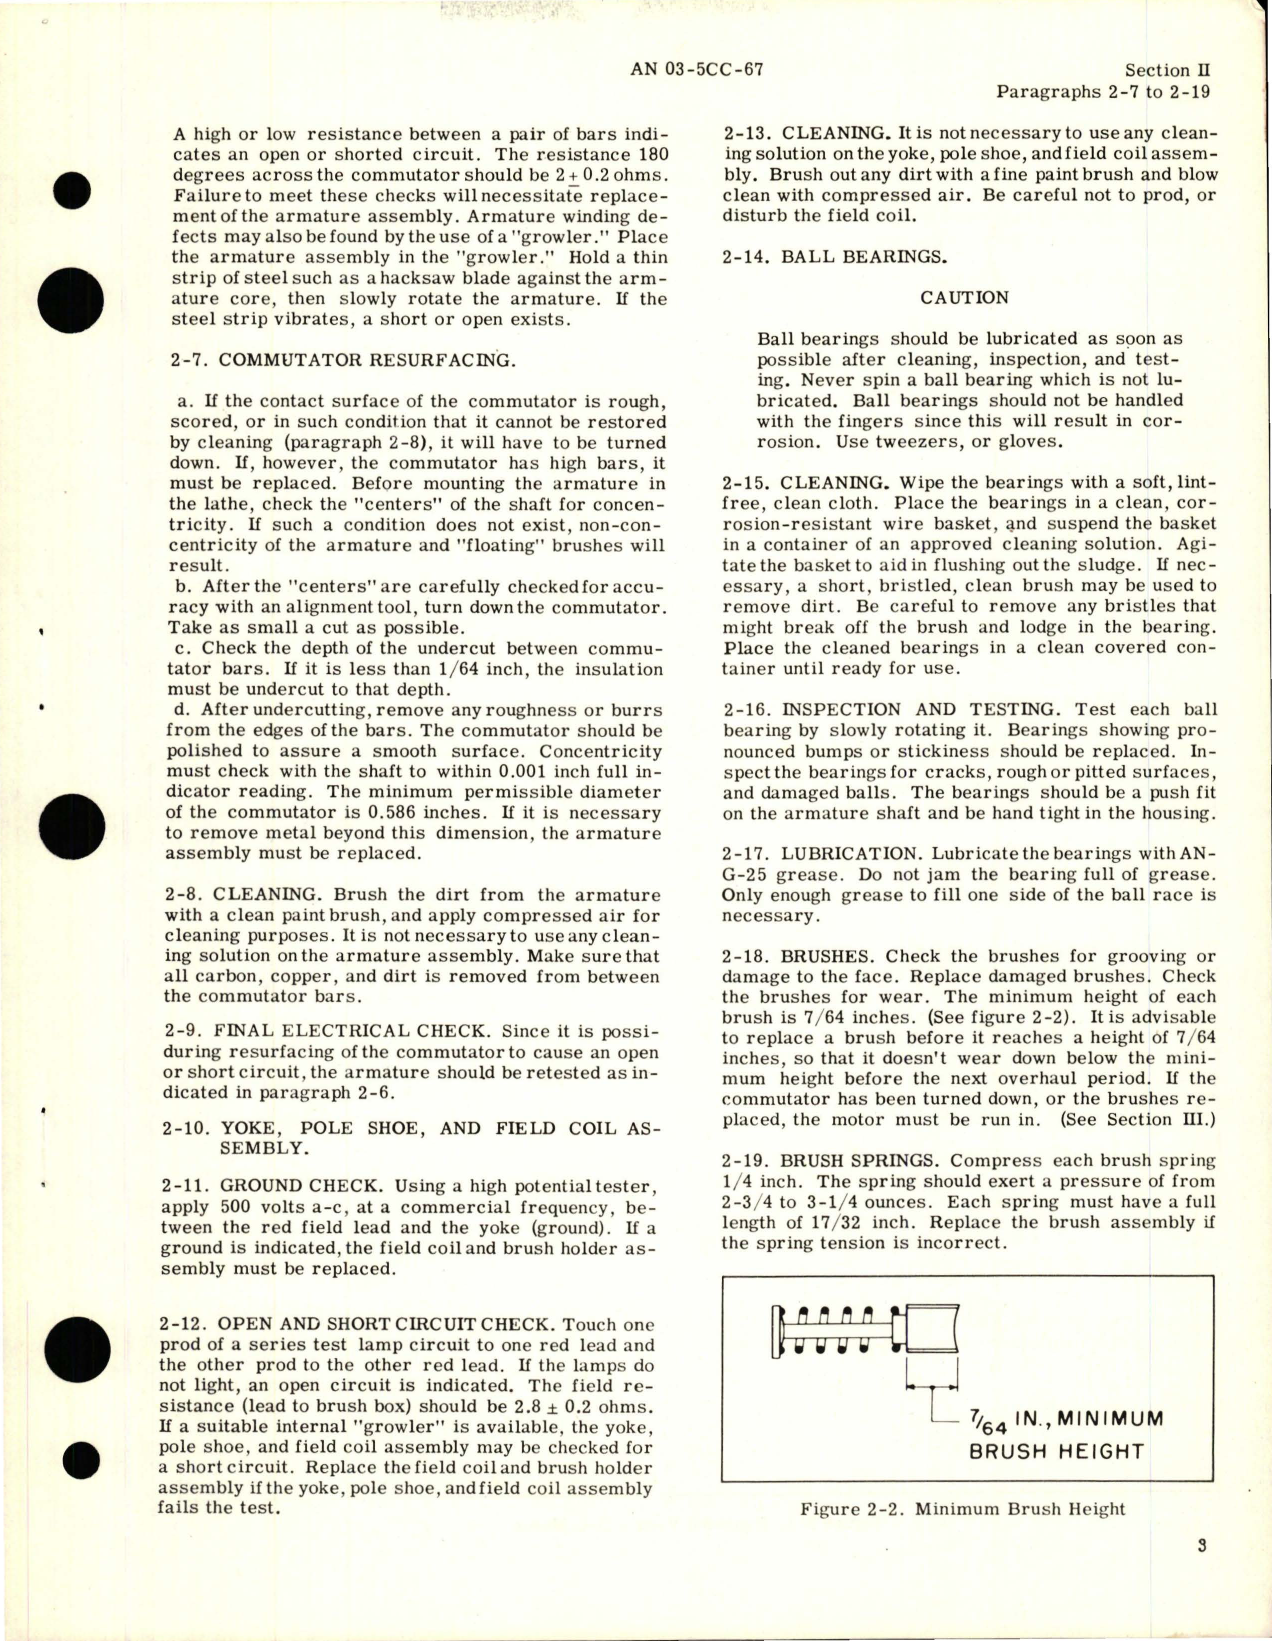 Sample page 5 from AirCorps Library document: Overhaul Instructions for D-C Motor - Model MA-27A